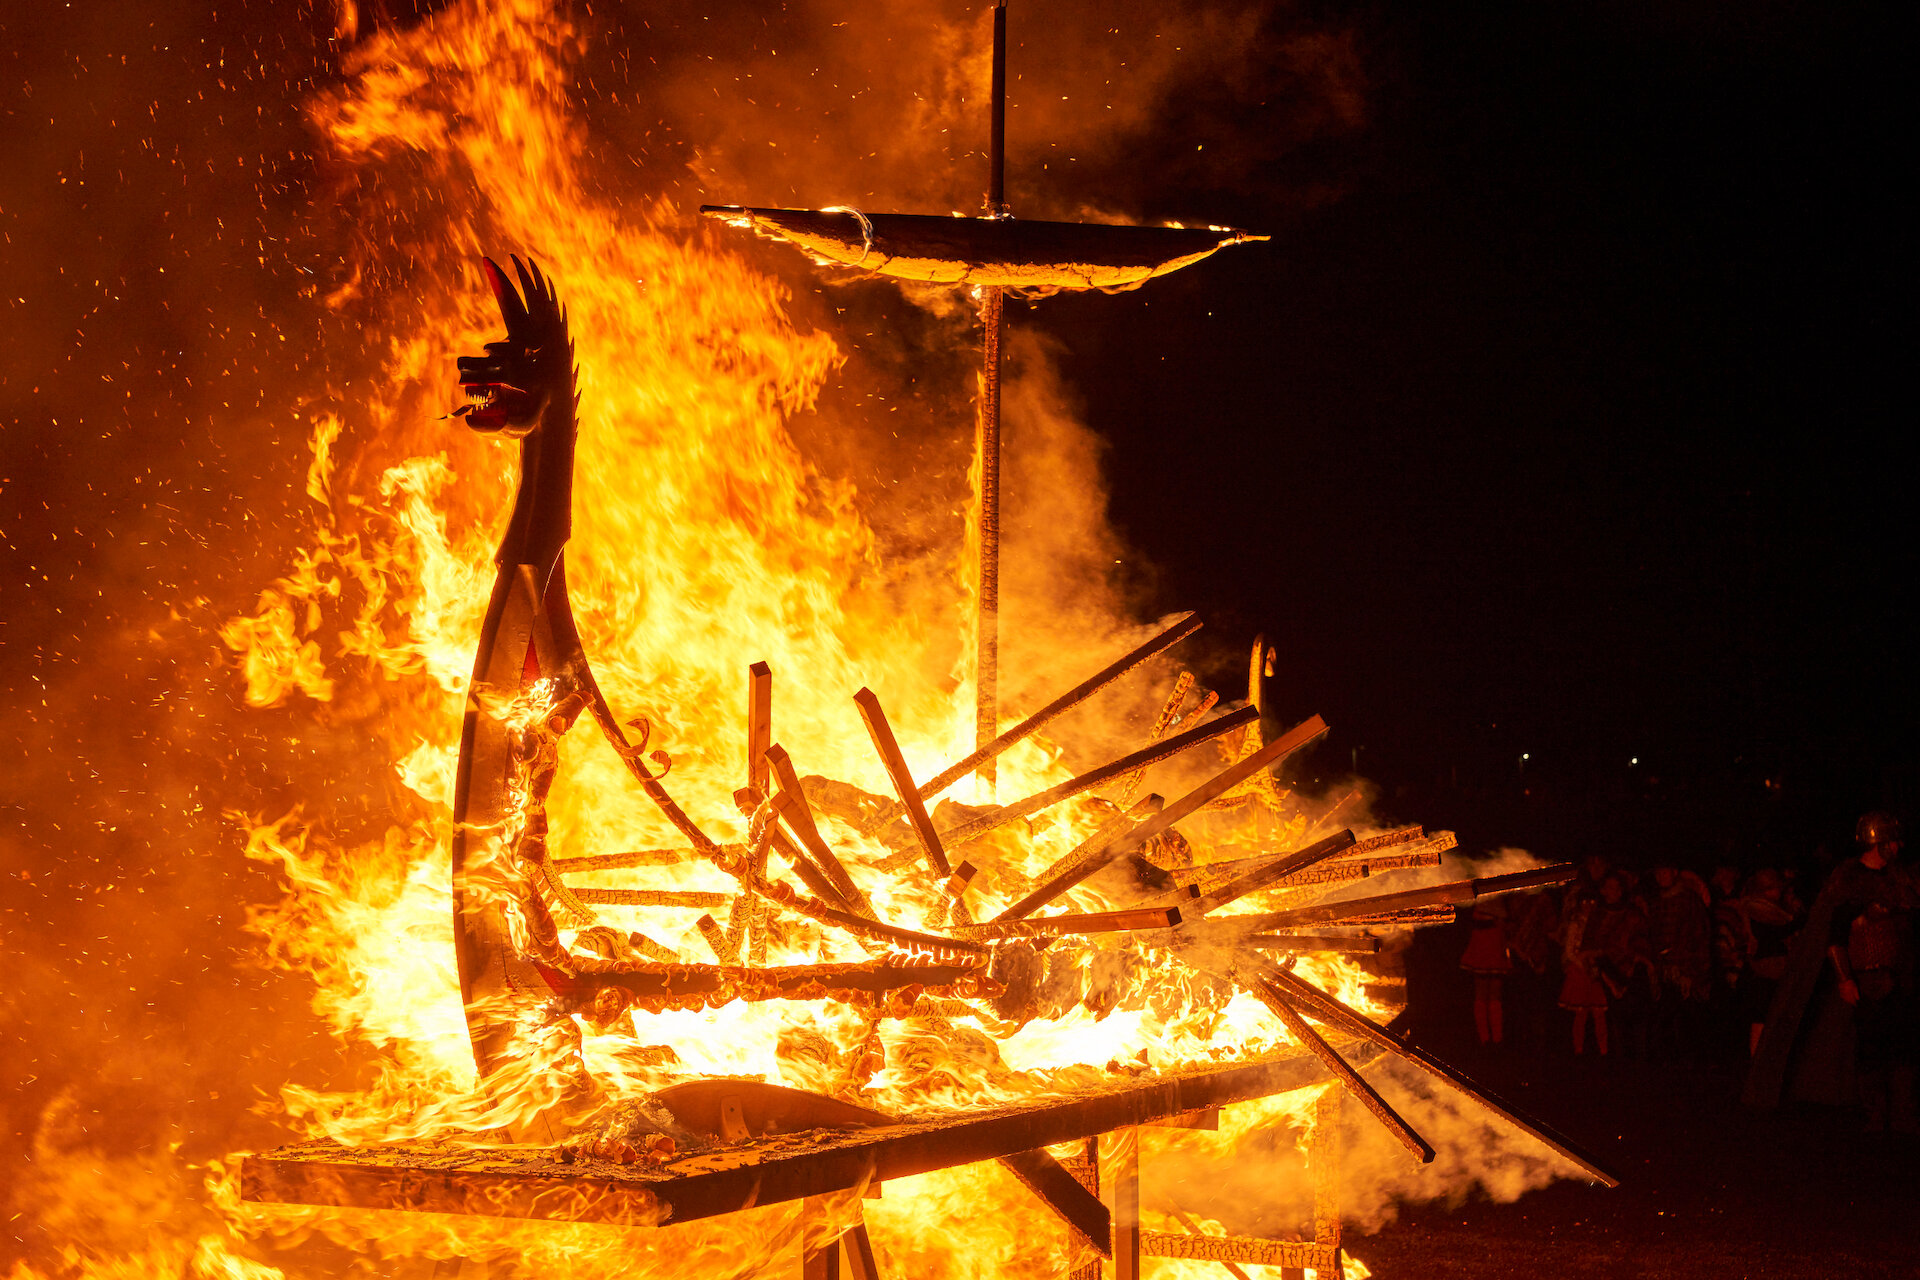 The procession culminates with guizers throwing their torches into a replica Viking longship and setting it ablaze. Photo: Euan Myles/Promote Shetland.